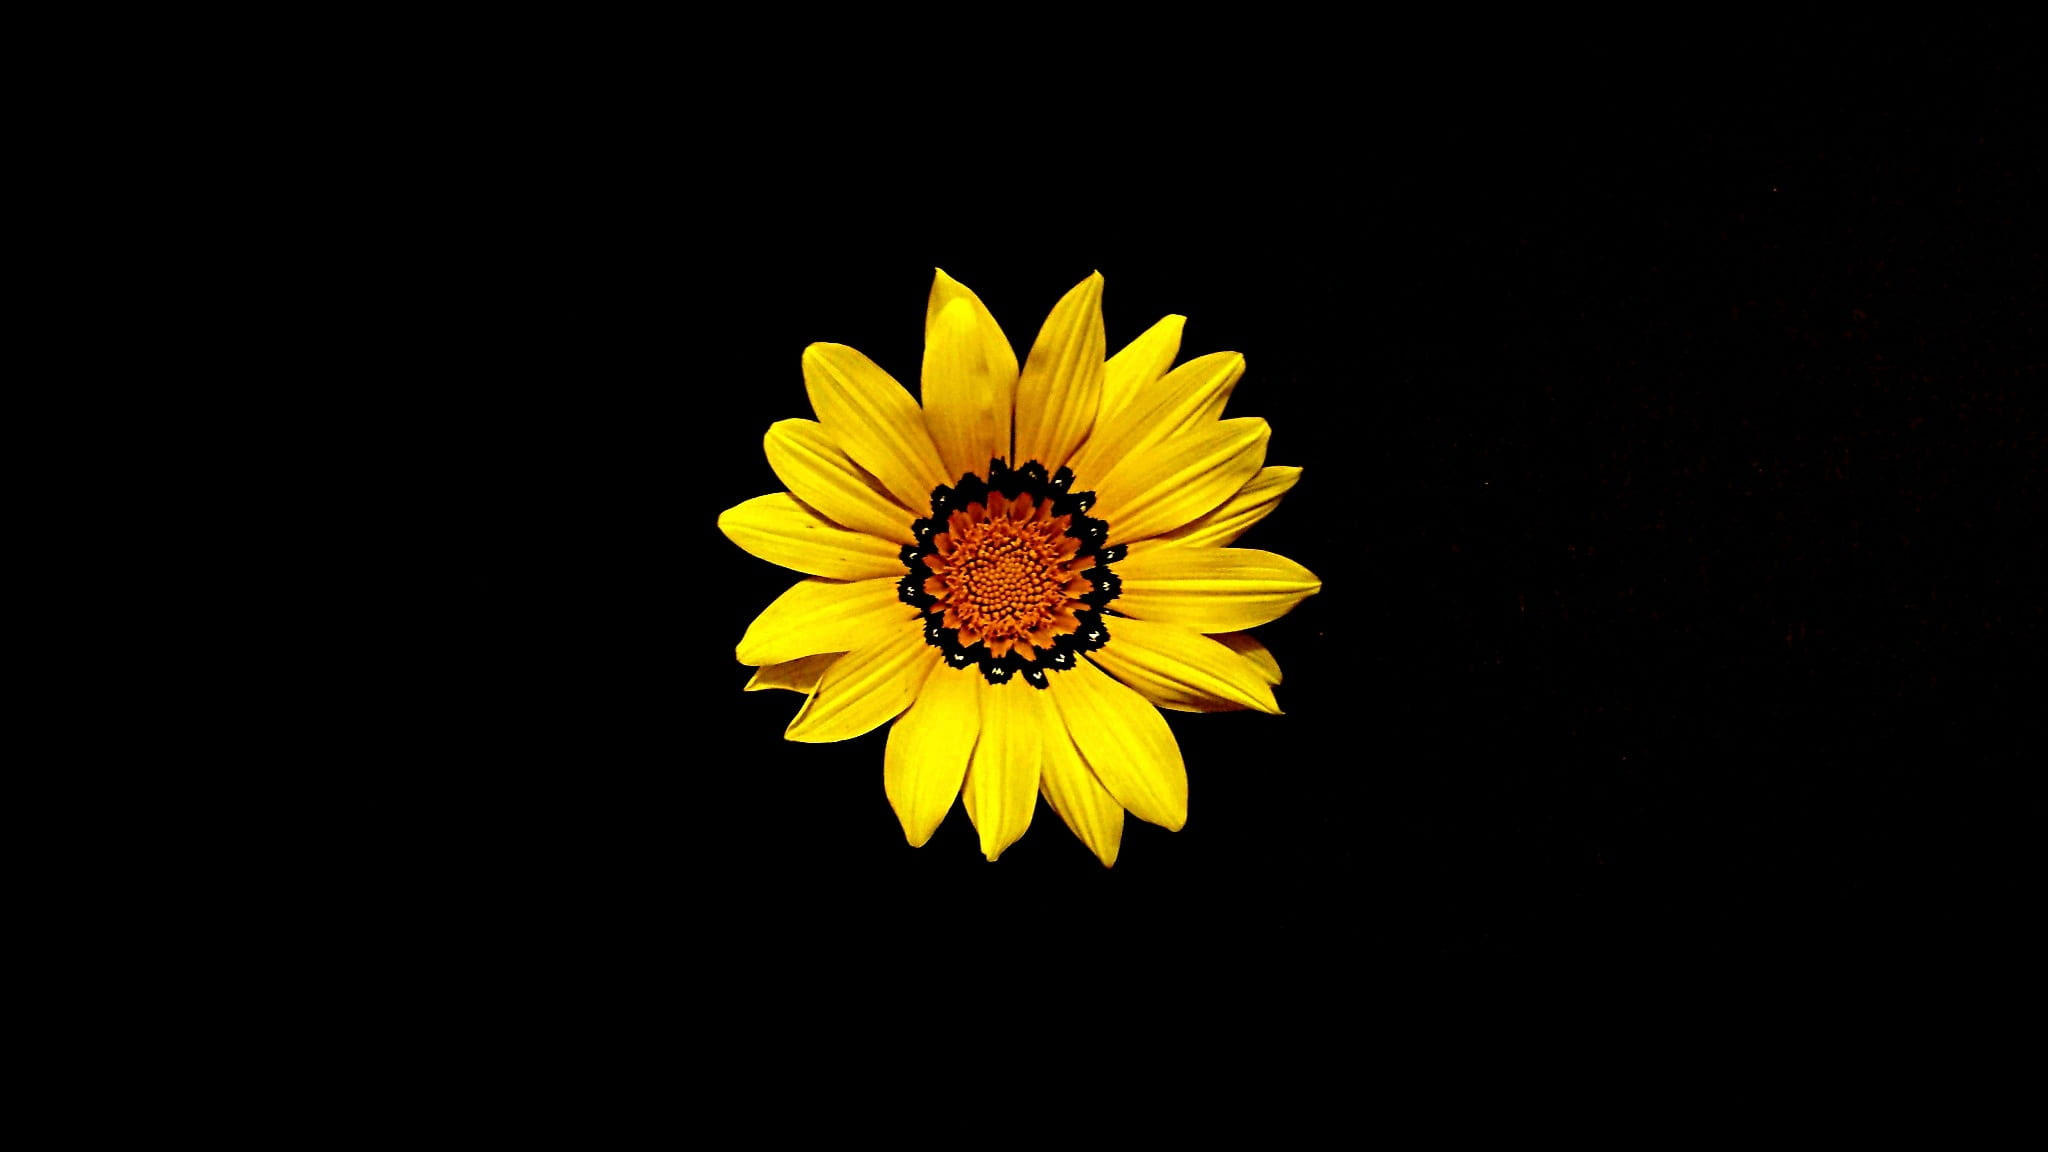 Yellow sunflower blooming wallpaper, mother's day, nature, spring, floral